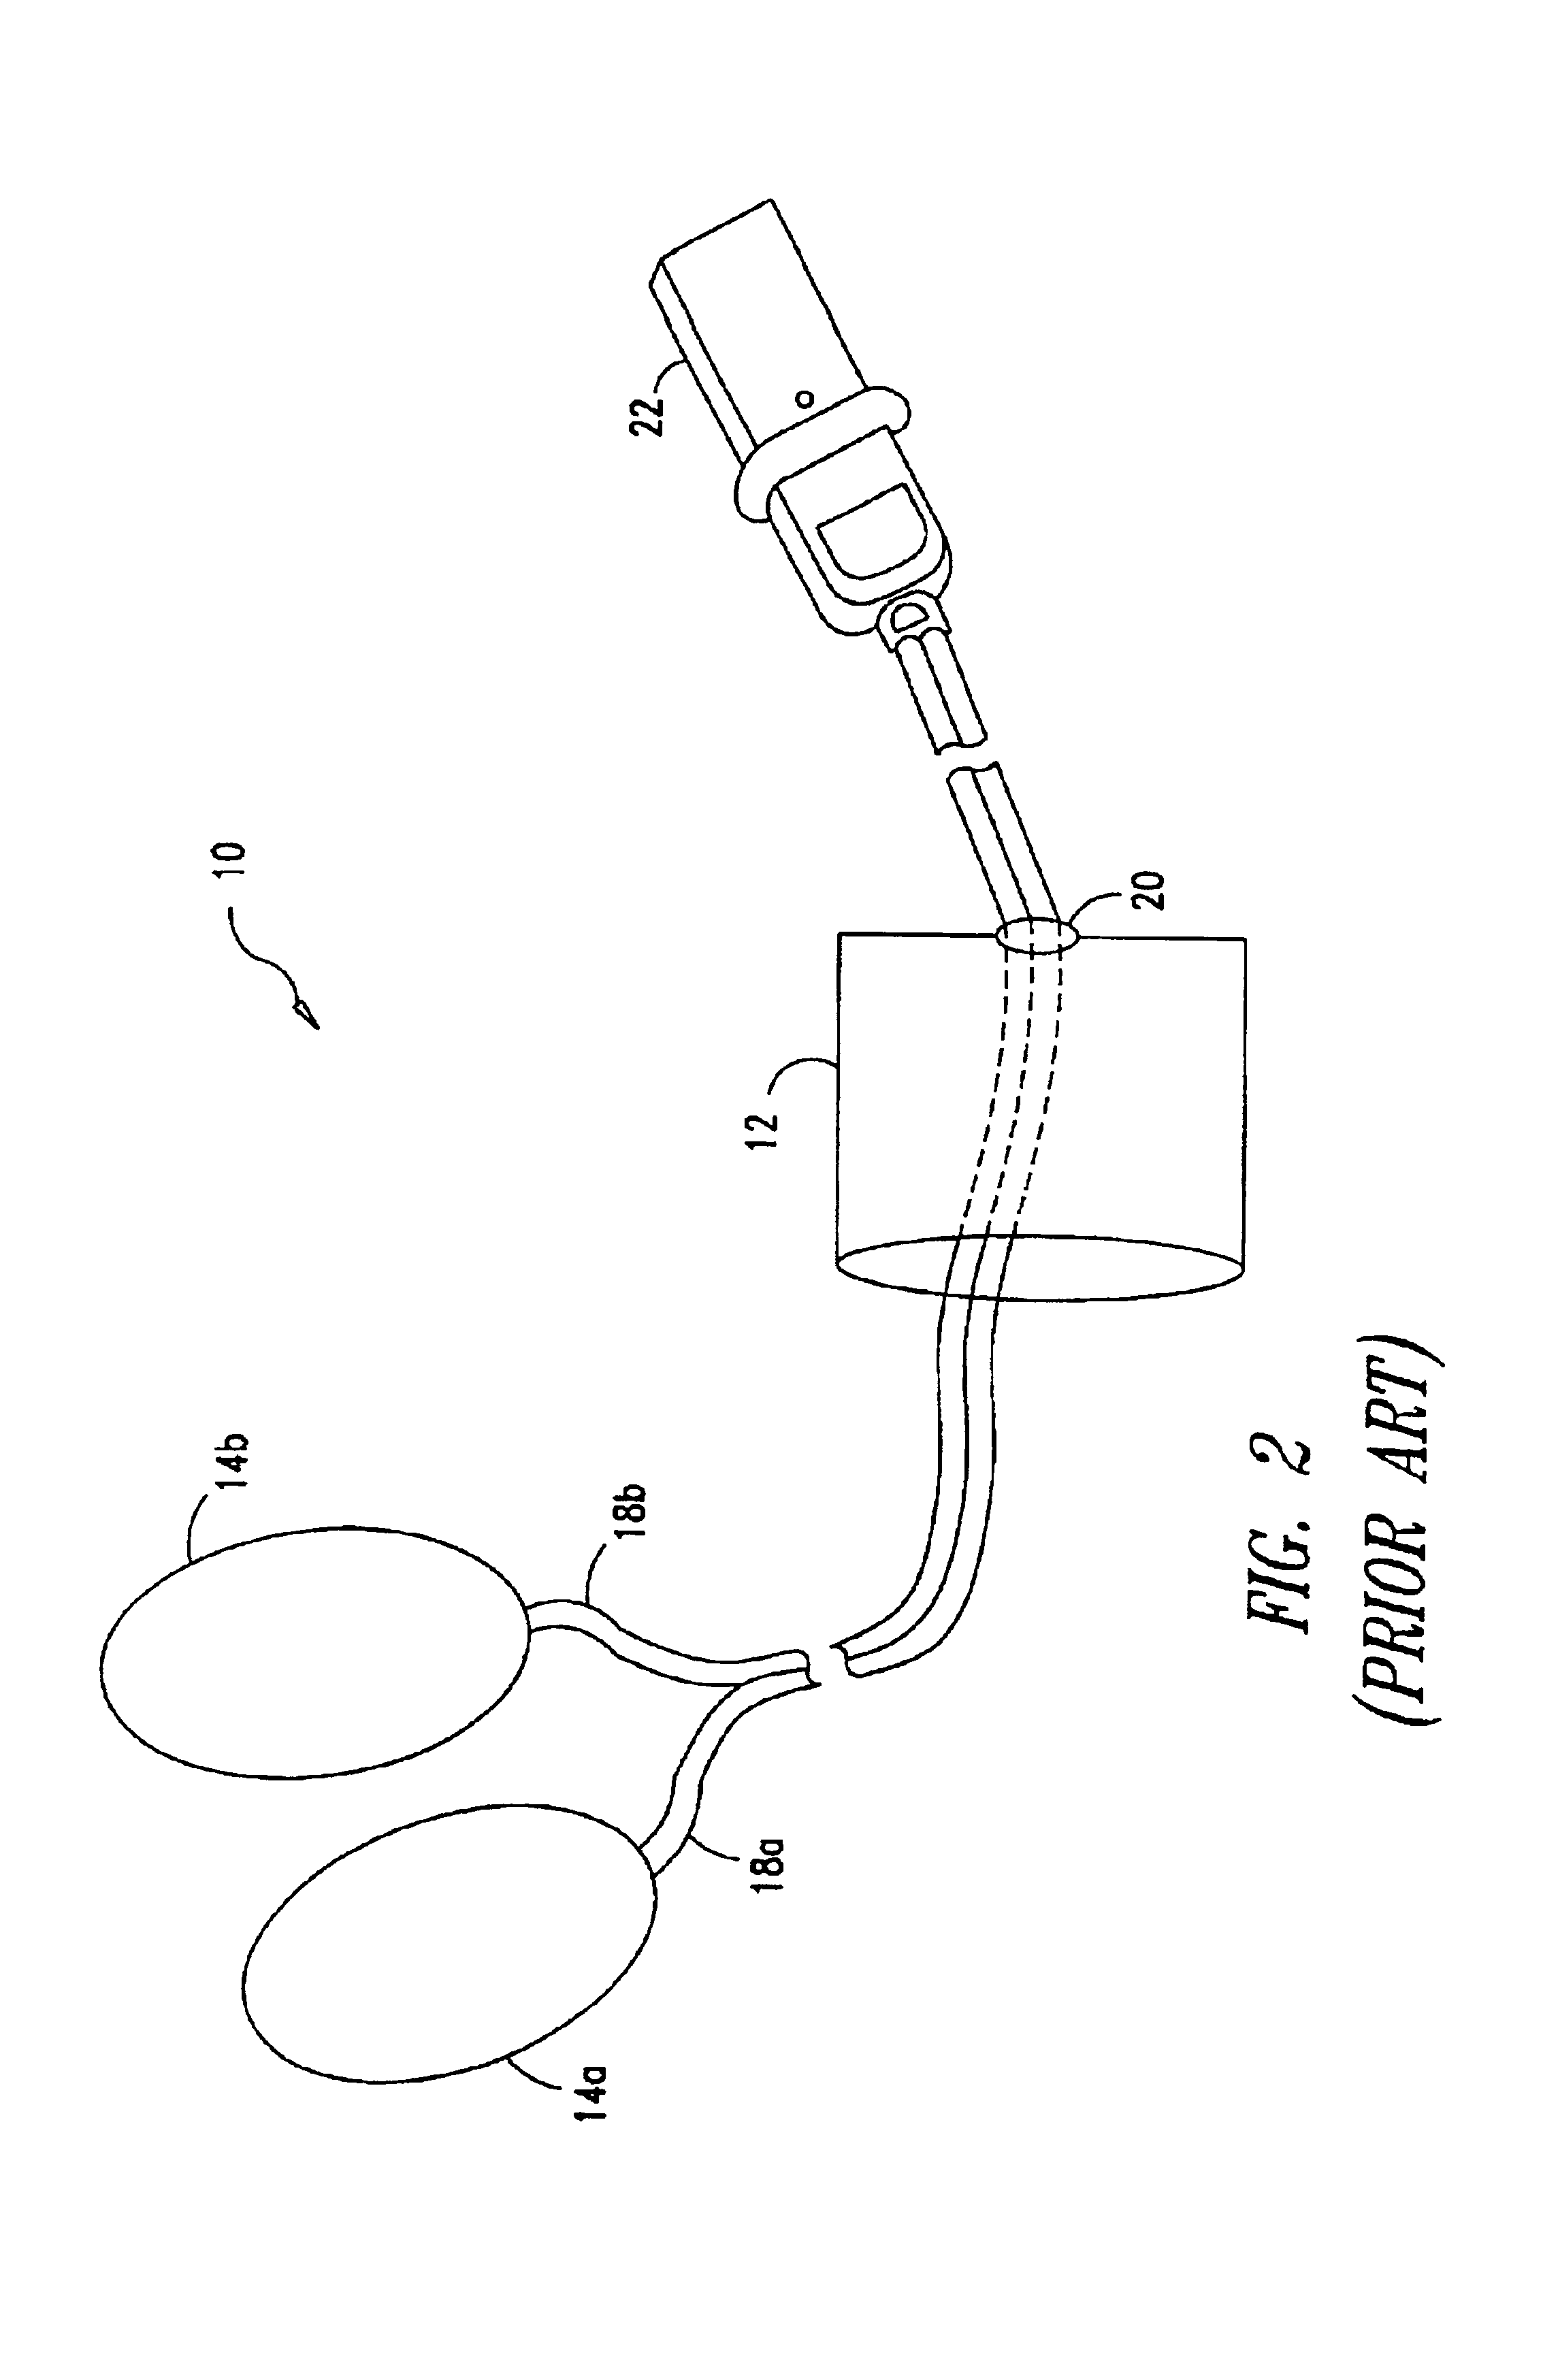 Electrode-pad package that is removable from an electrode-pad lead and method for opening the package